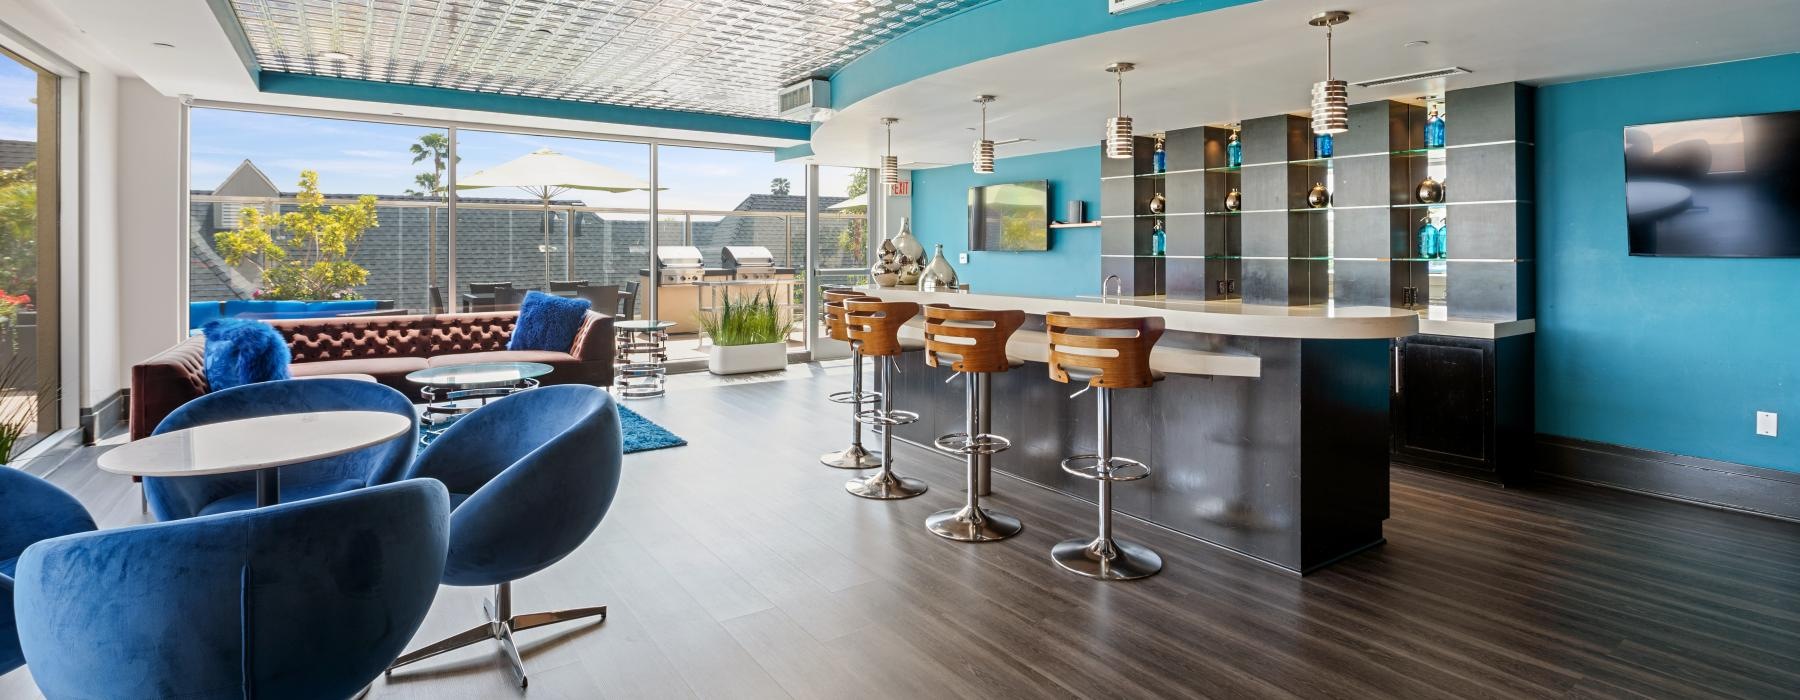 a room with blue chairs and a bar